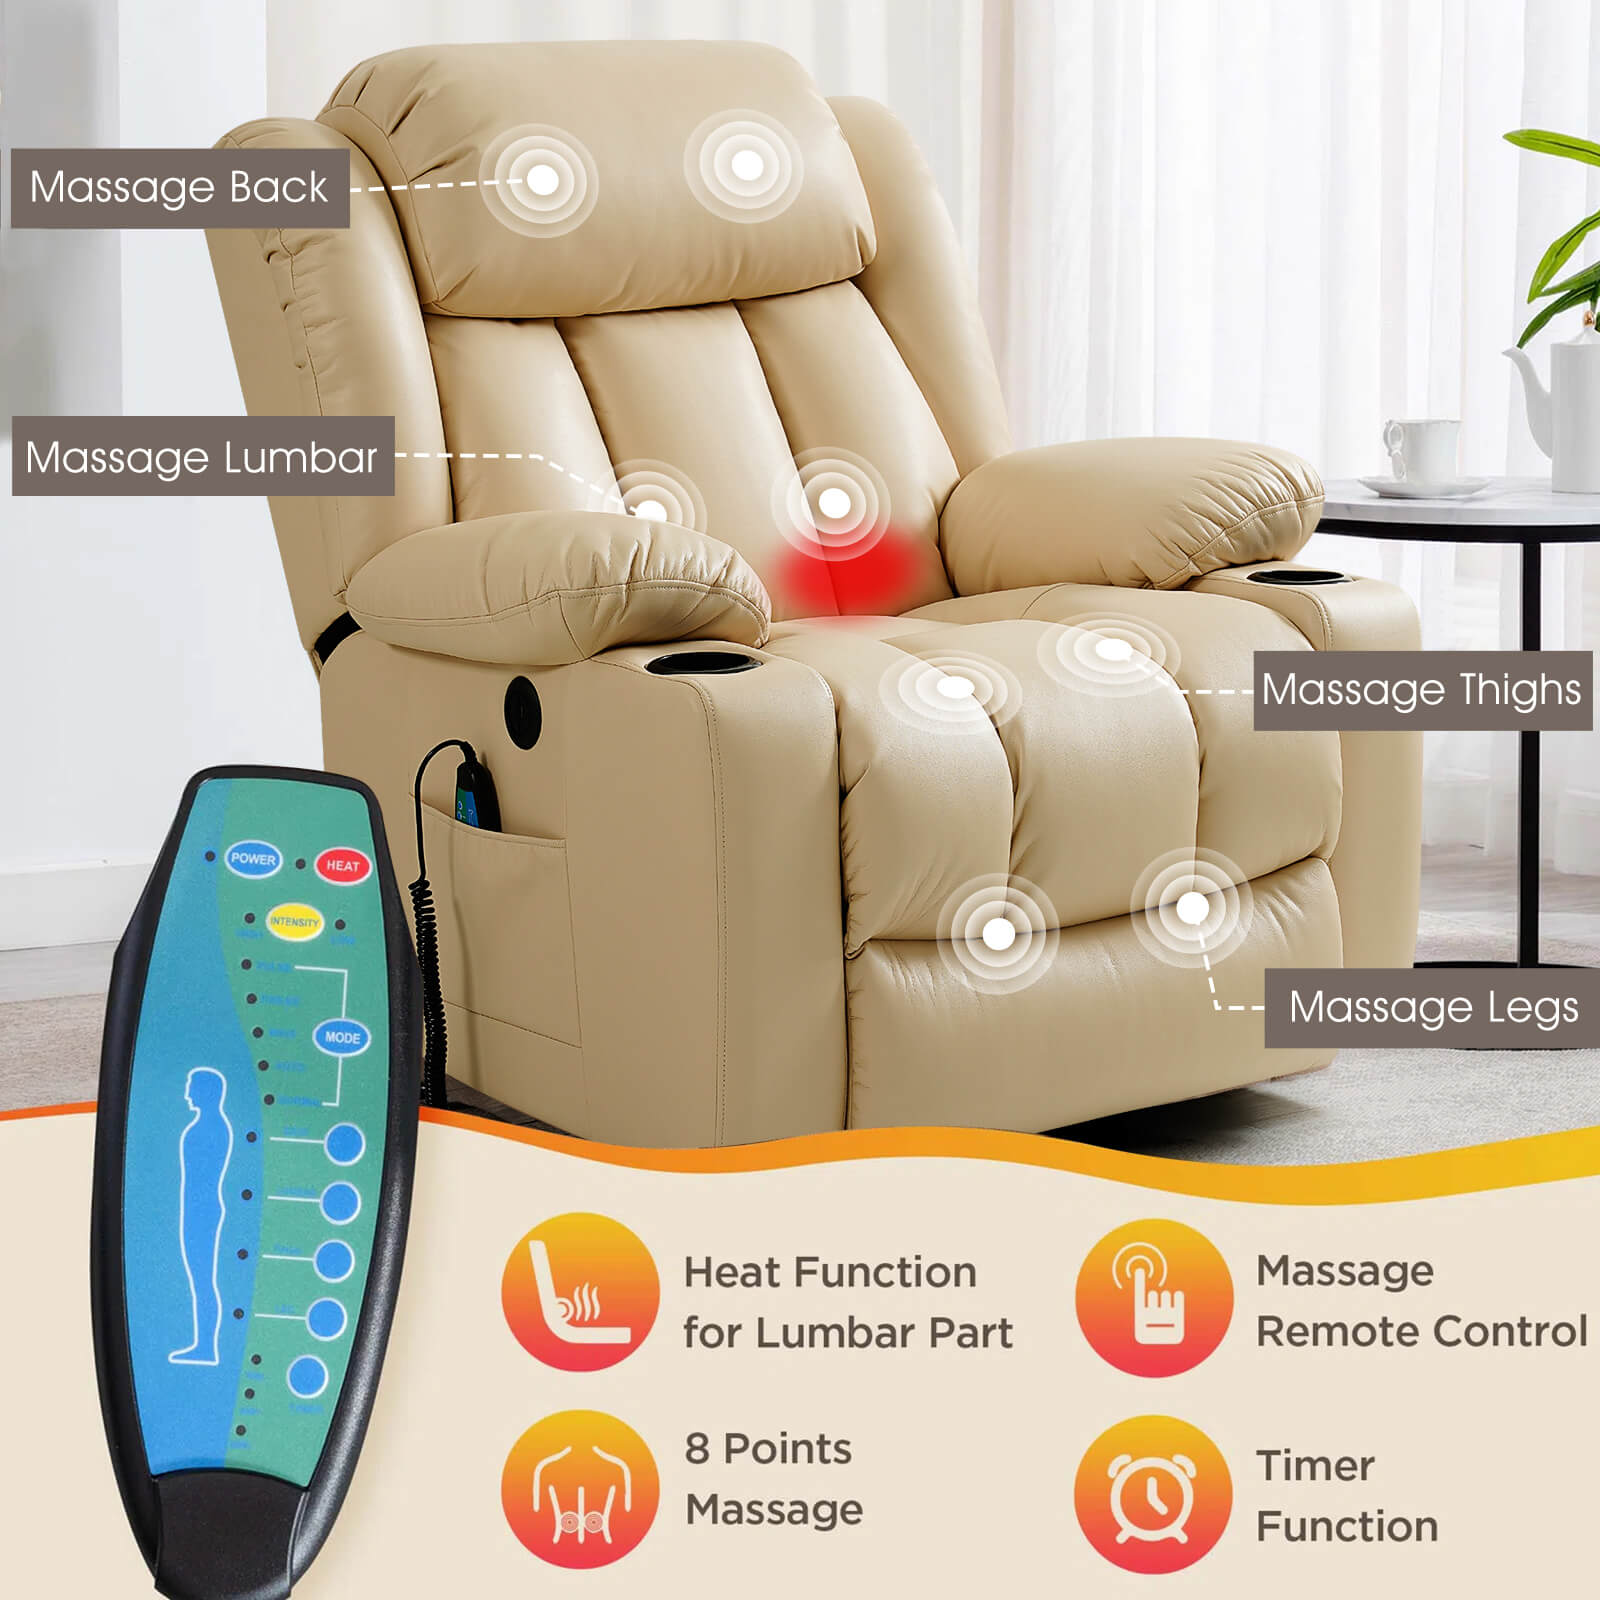 Soulout Luxury Lift Chair Recliner with Heat and Massage Beige